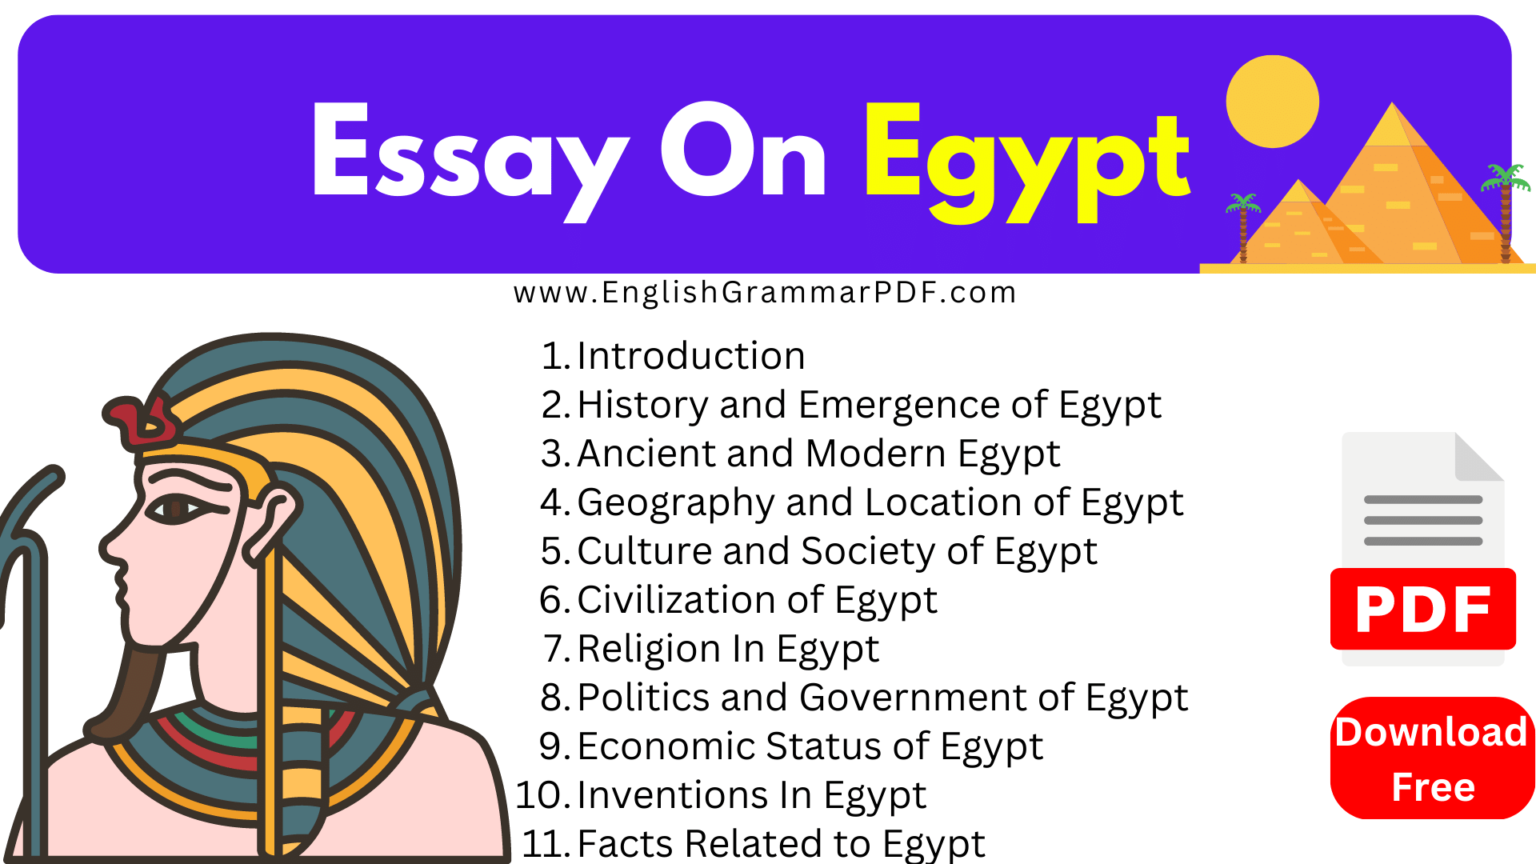 how to improve tourism in egypt essay